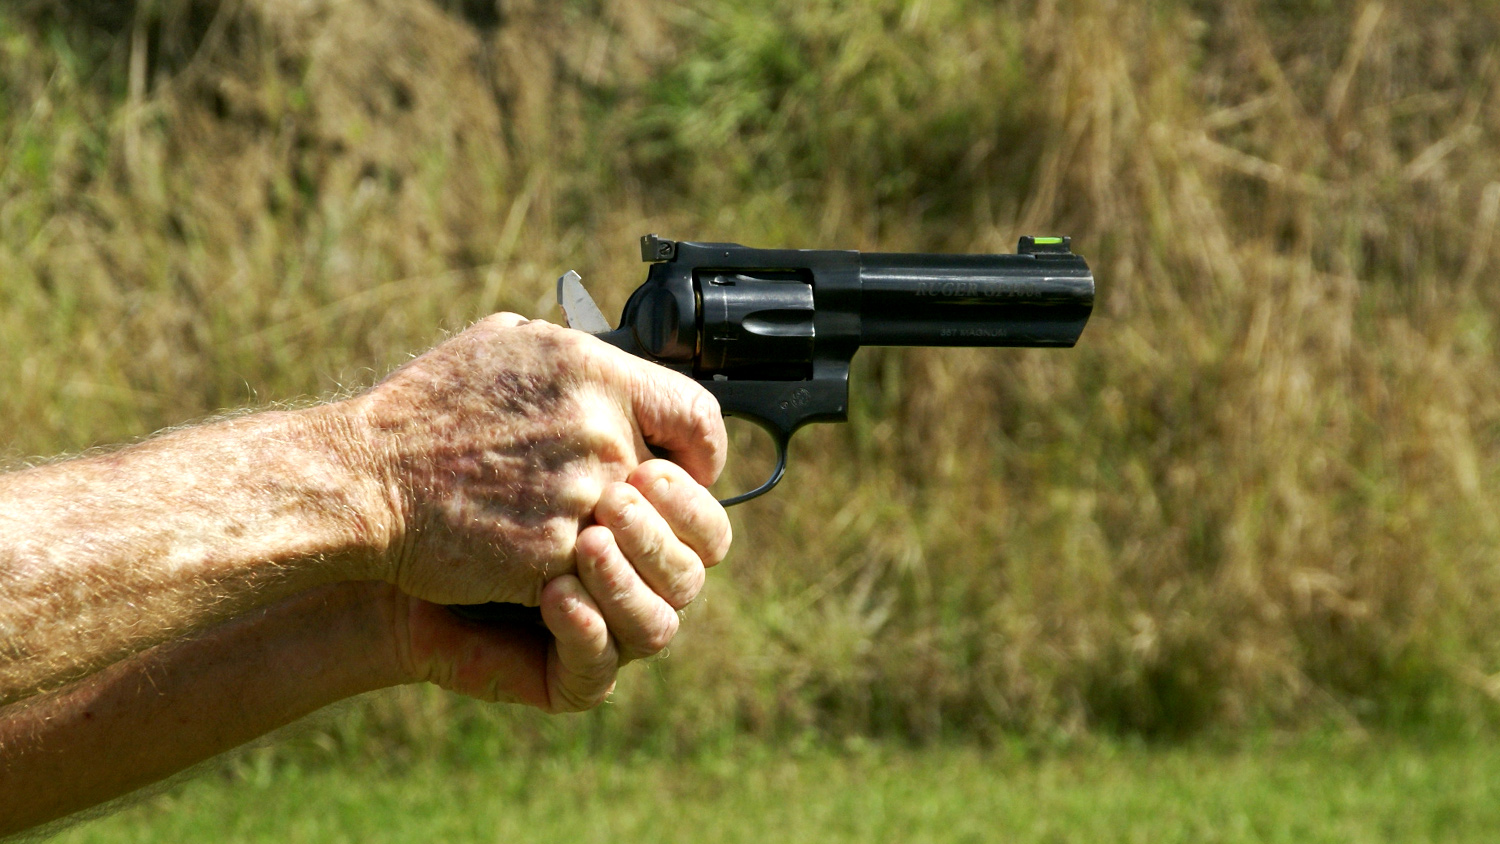 Staging the trigger allows a single-action pull without shifting the grip to cock a hammer. It makes tight shots faster and easier.